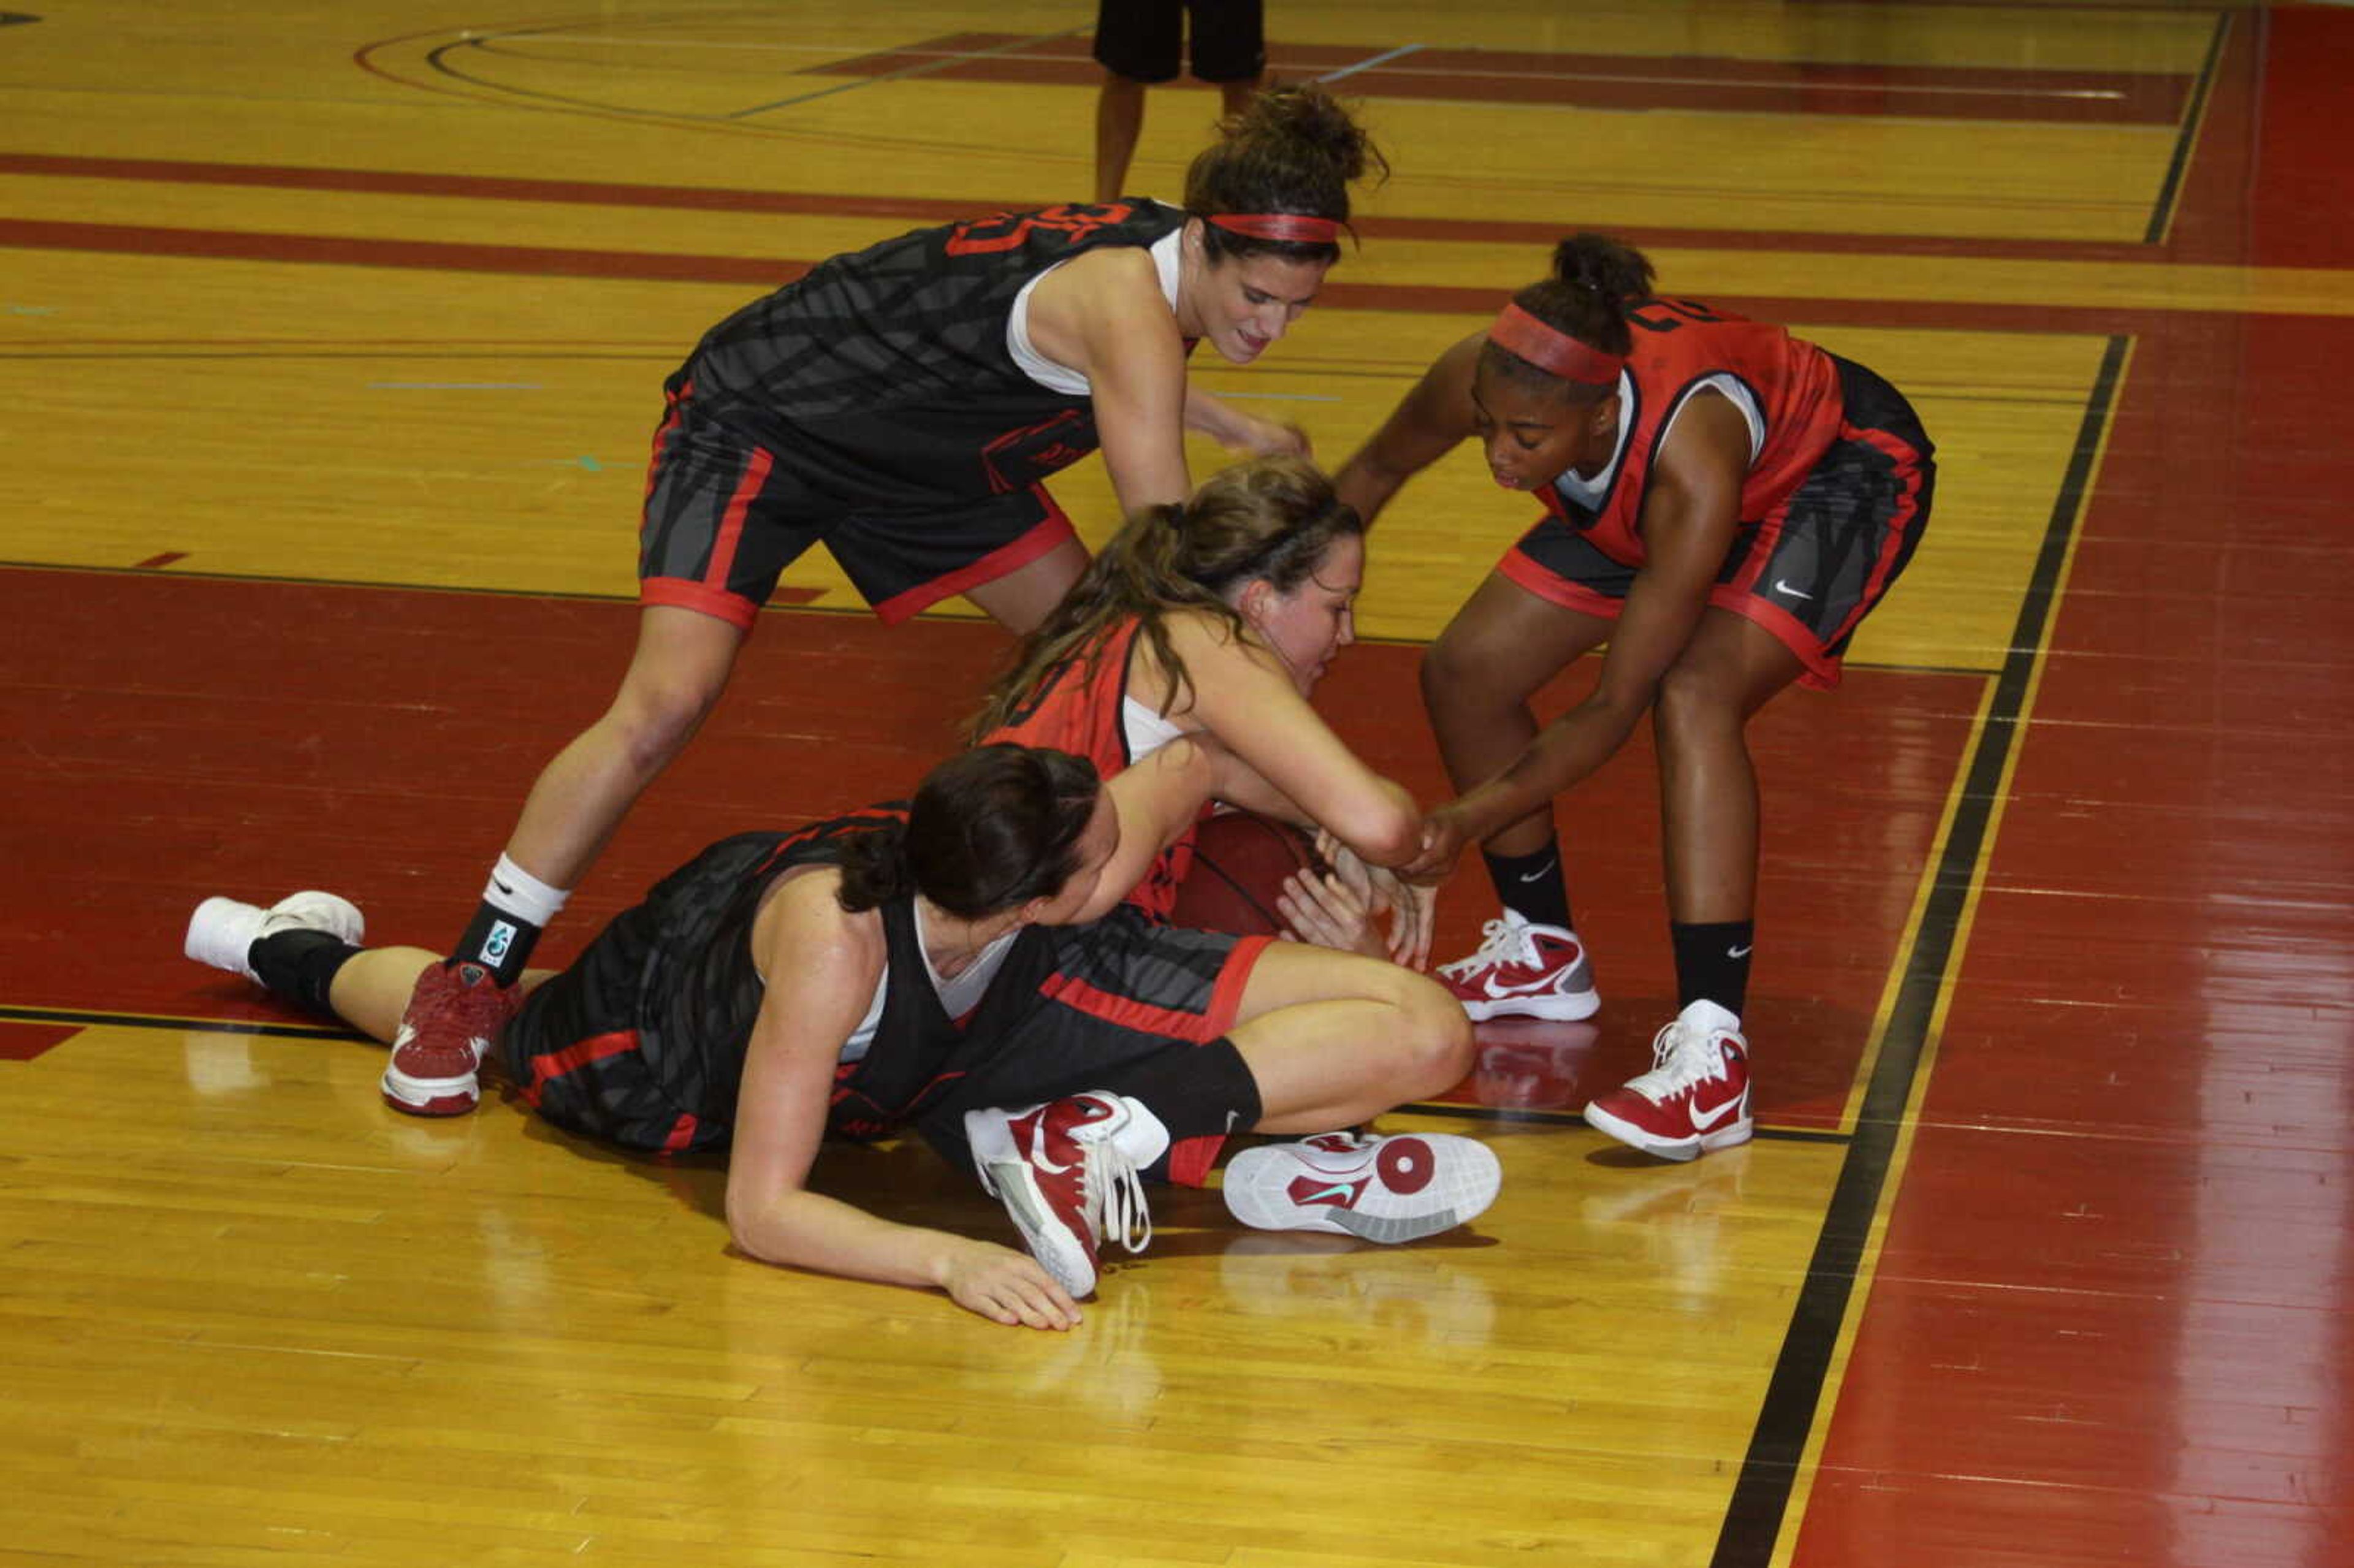 (Clockwise from top) Katie Norman, Yelena Rosado, Bailie Roberts and Brittany Harriel fight for possession of the basketball during the team's practice on Oct. 21. - Photo by Kelso Hope